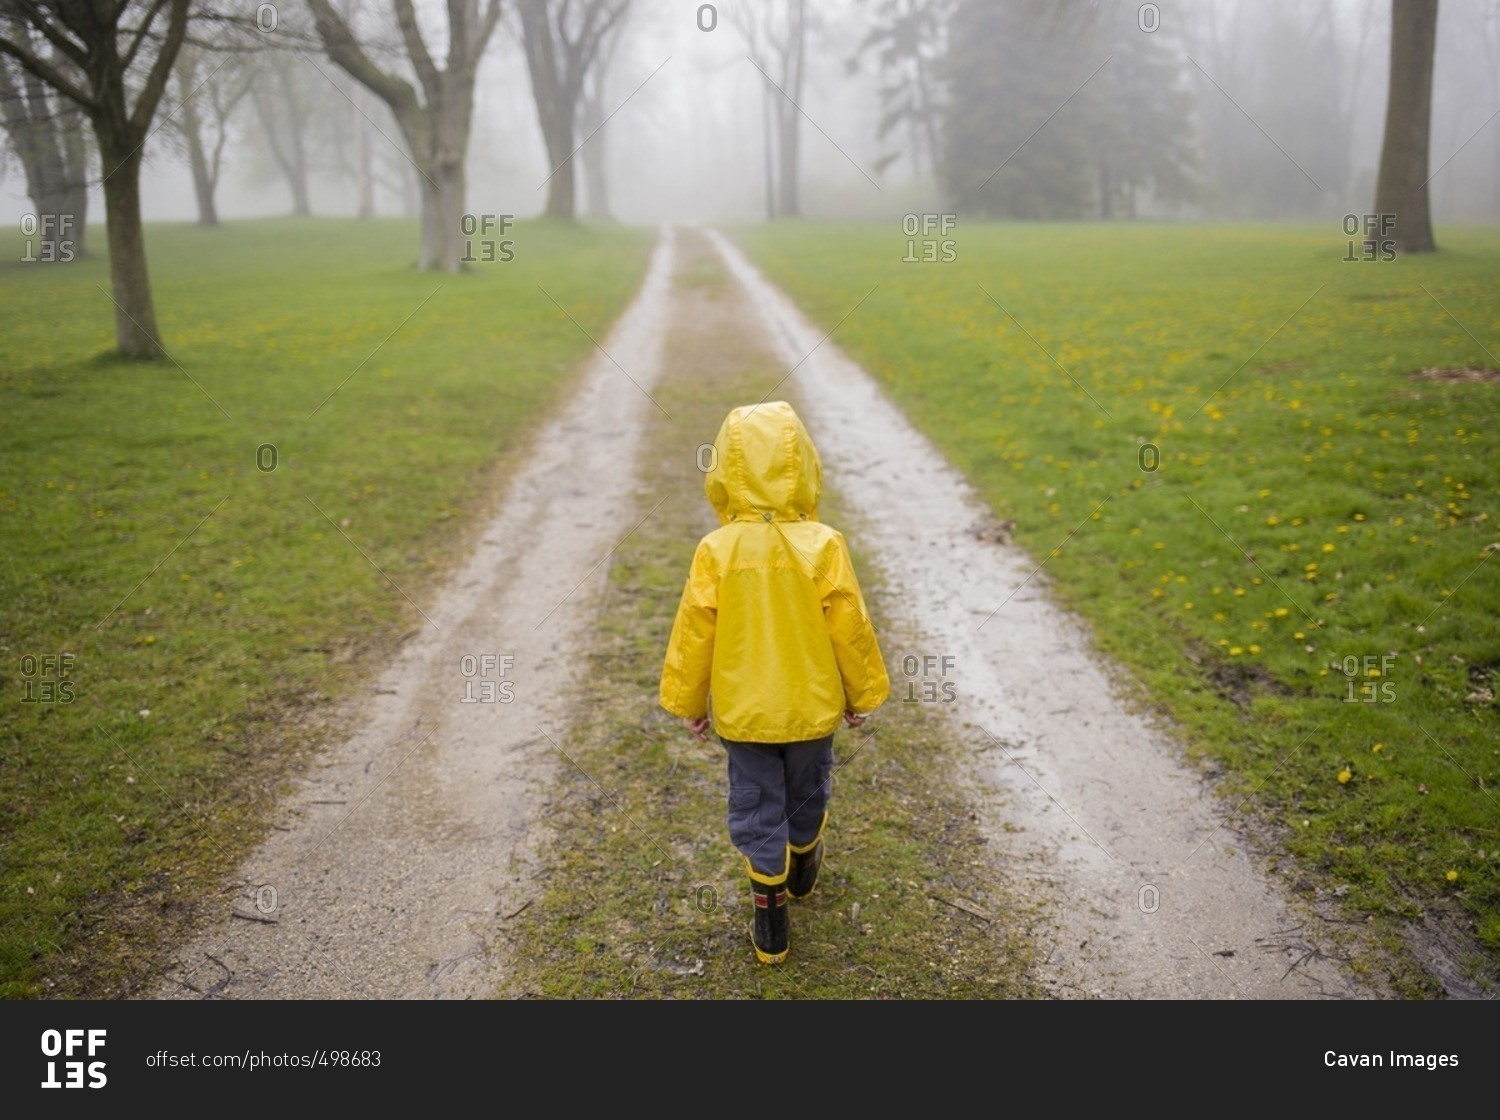 Rear view of boy in raincoat walking on dirt road during foggy weather